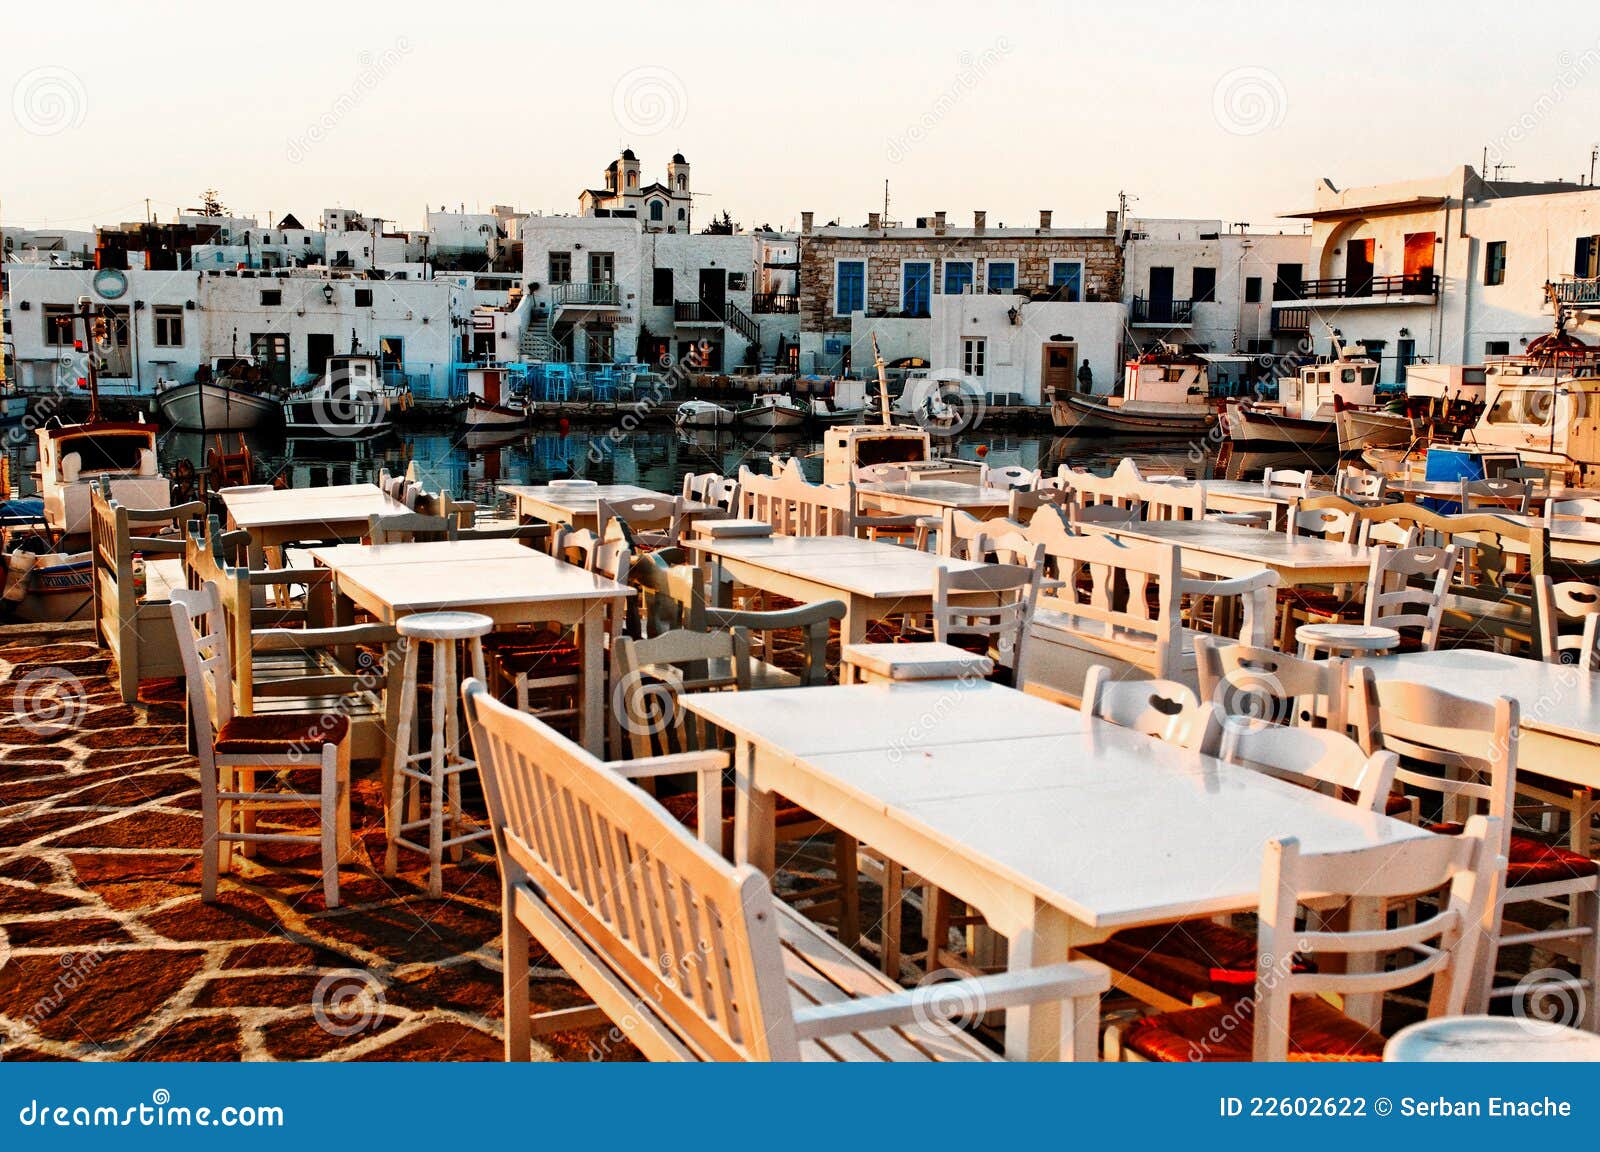 Restaurant in Greece stock photo. Image of building, chairs - 22602622